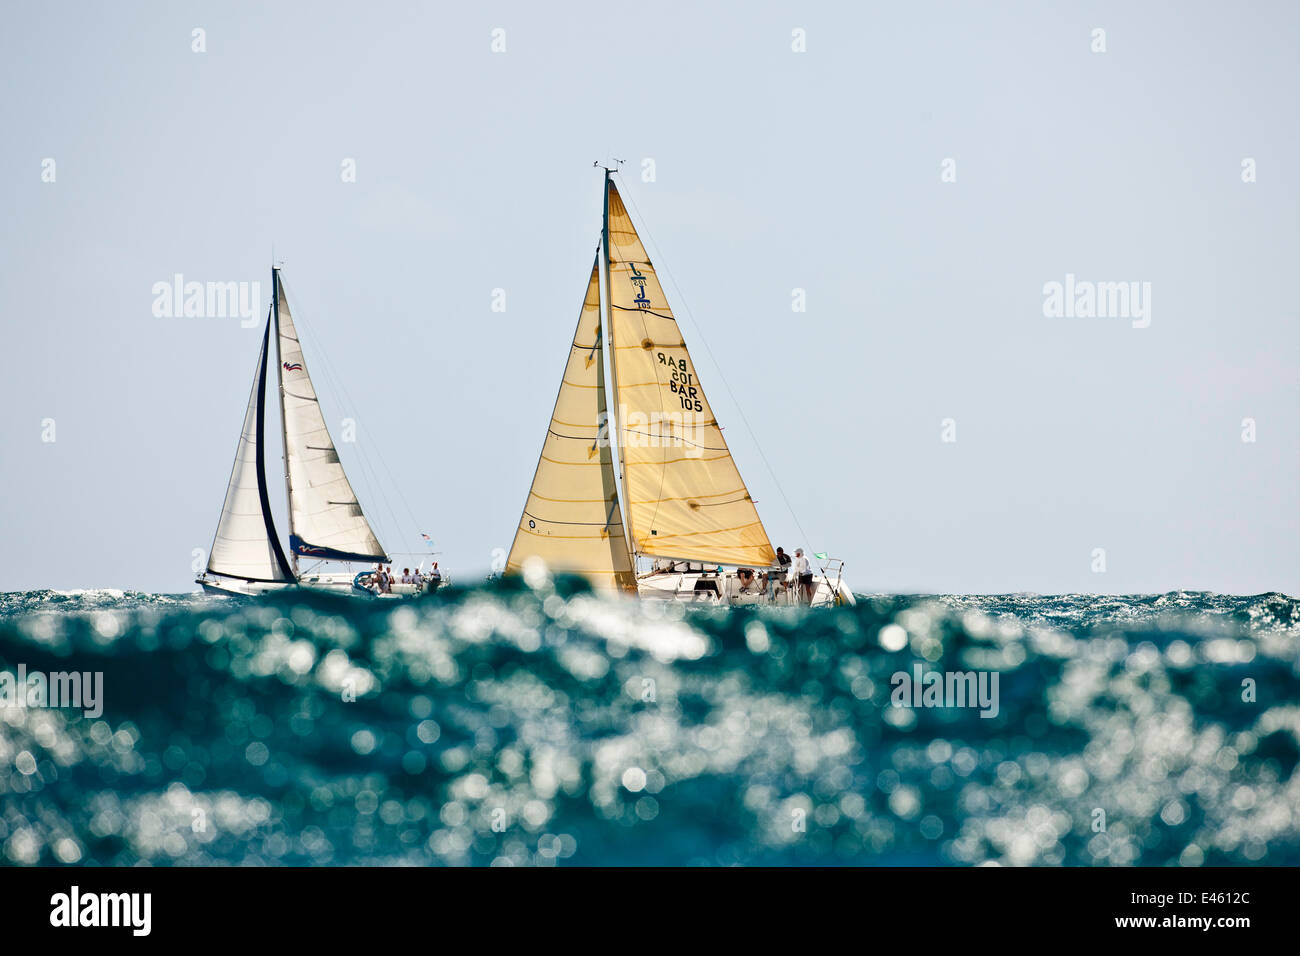 Two yachts obscured by glistening wave during the Grenada Sailing Festival, Caribbean, January 2010. Stock Photo